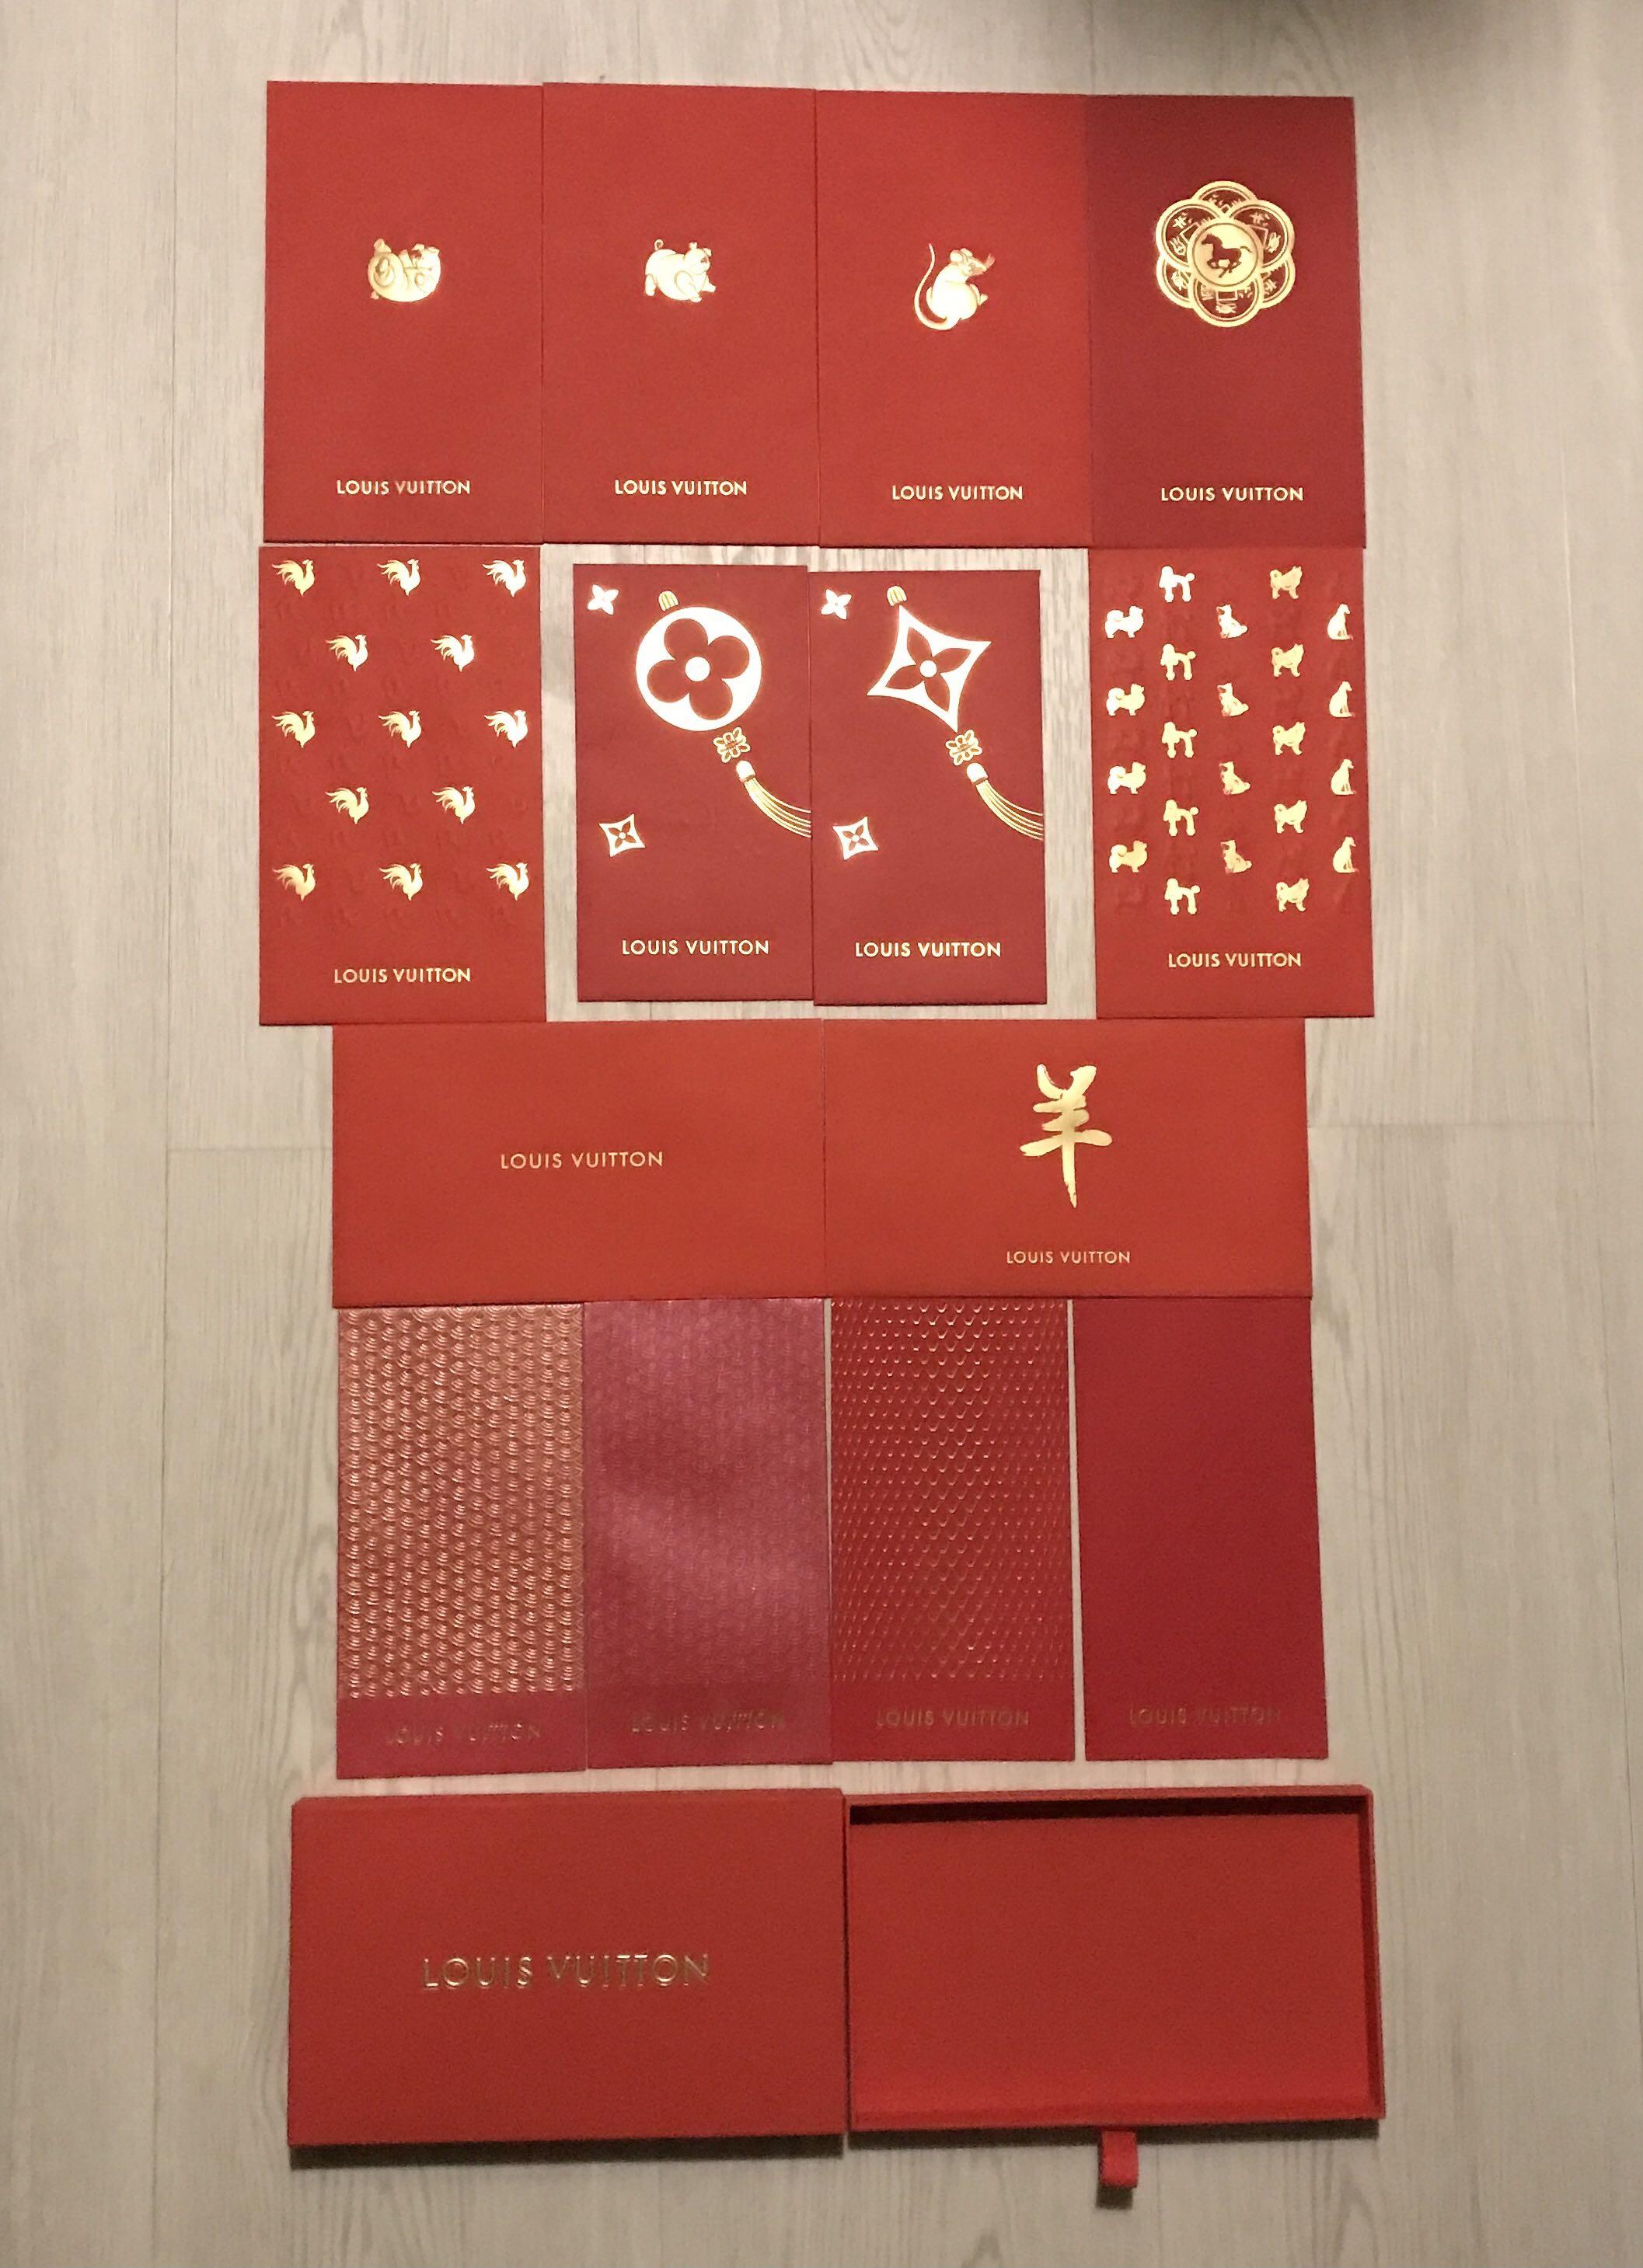 LOUIS VUITTON Lunar New Year 2019 12pc PIG Red Packet Envelope